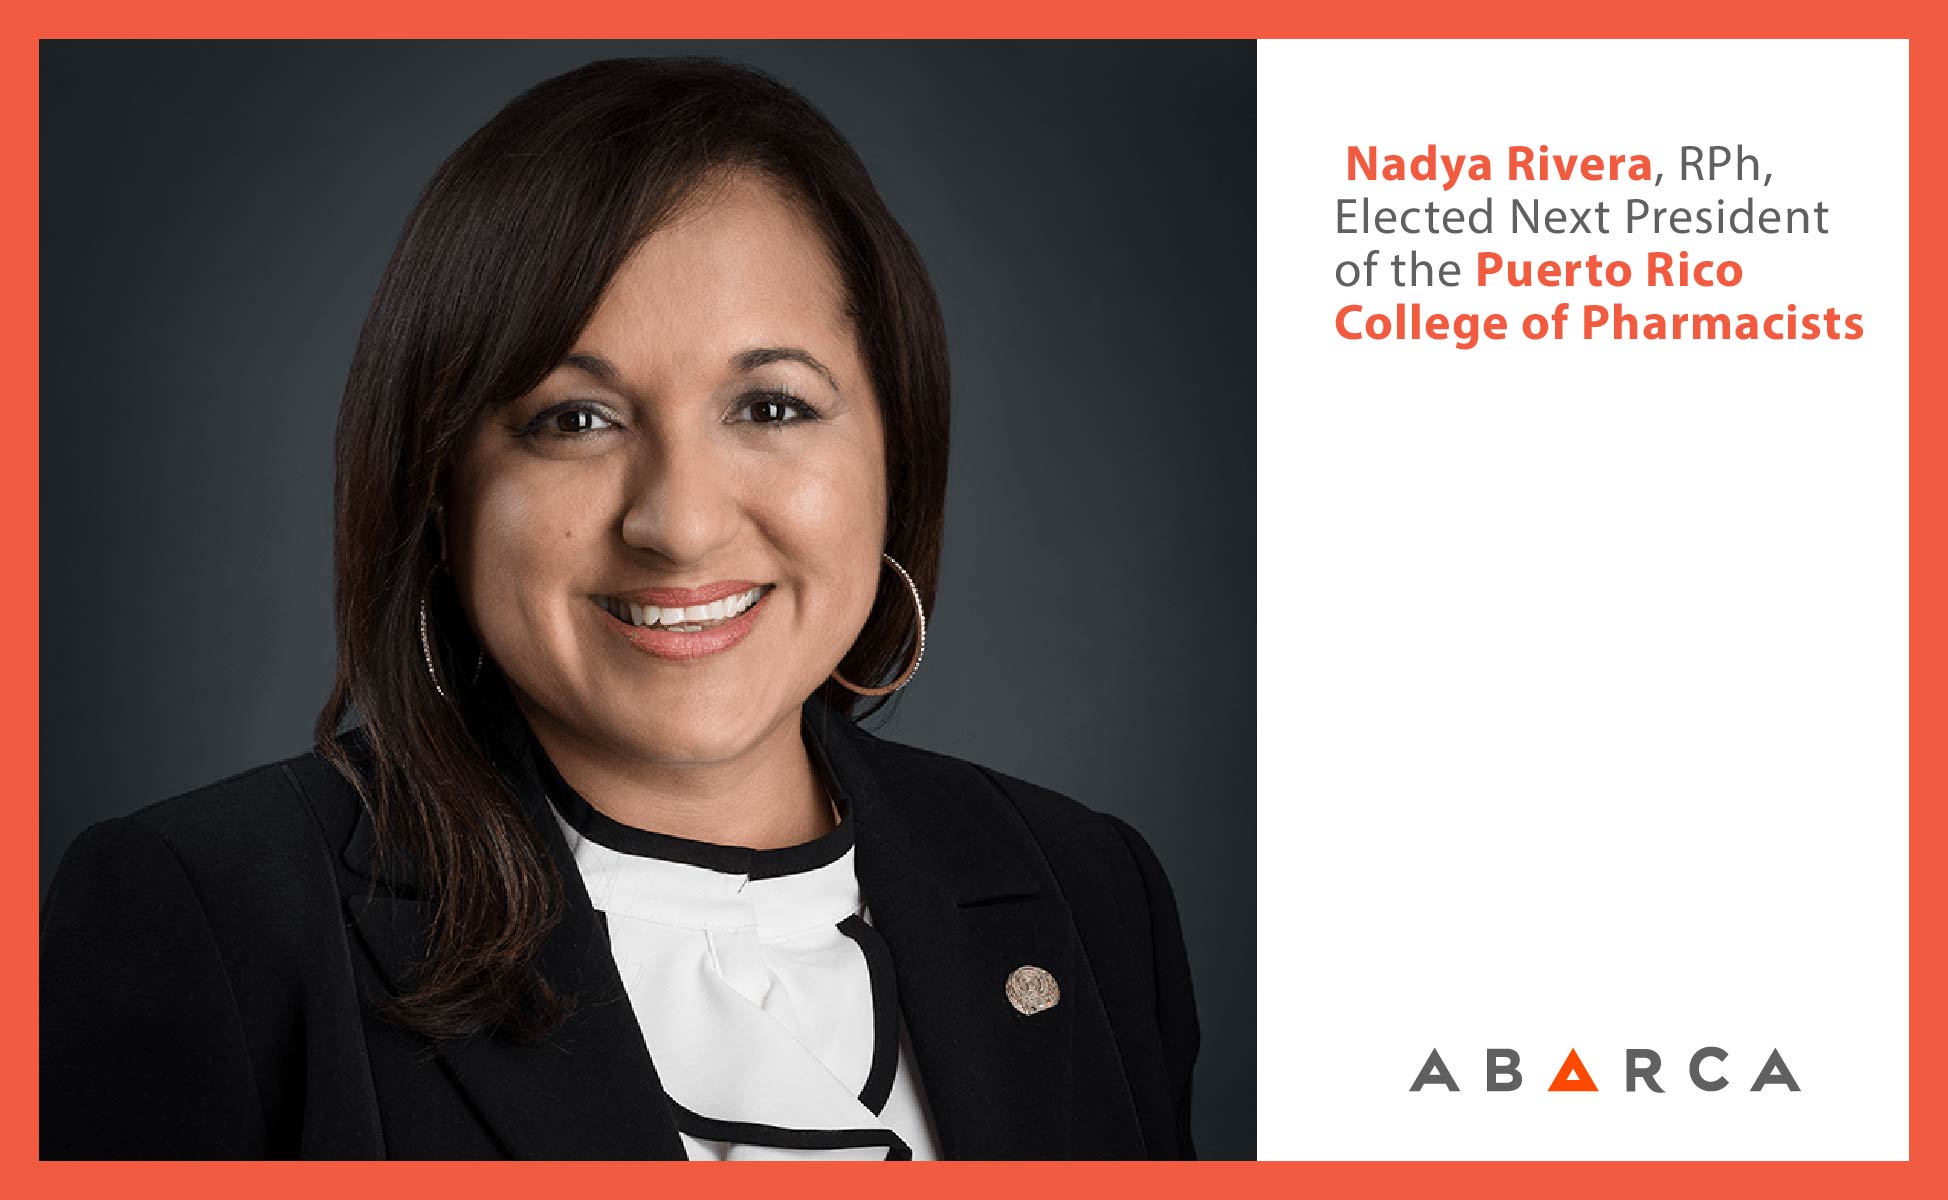 Abarca Health: Nayda Rivera, RPh, elected as next president of the Puerto Rico College of Pharmacists